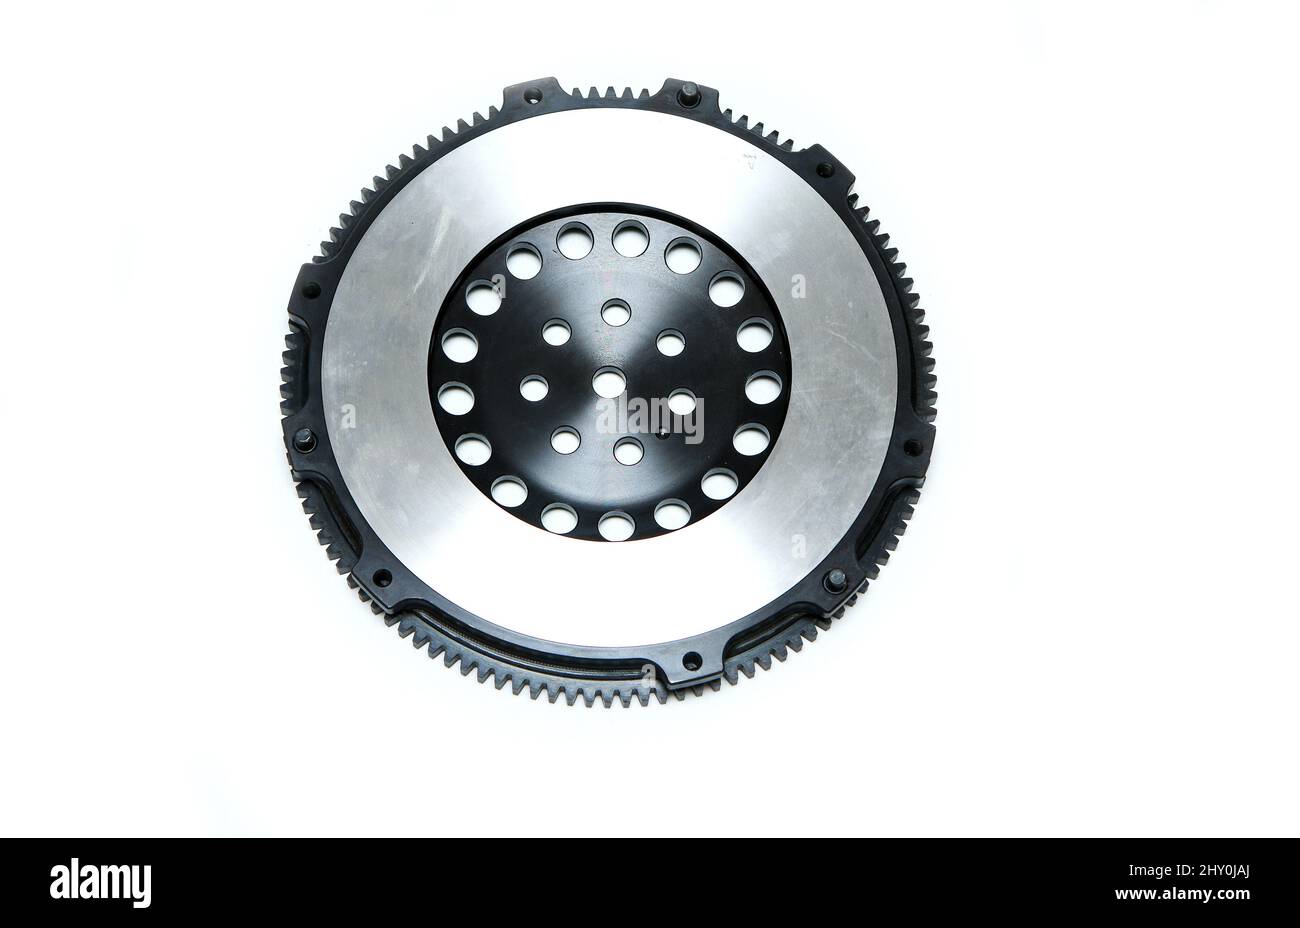 The shiny new lightweight engine flywheel isolated in a white background. Stock Photo